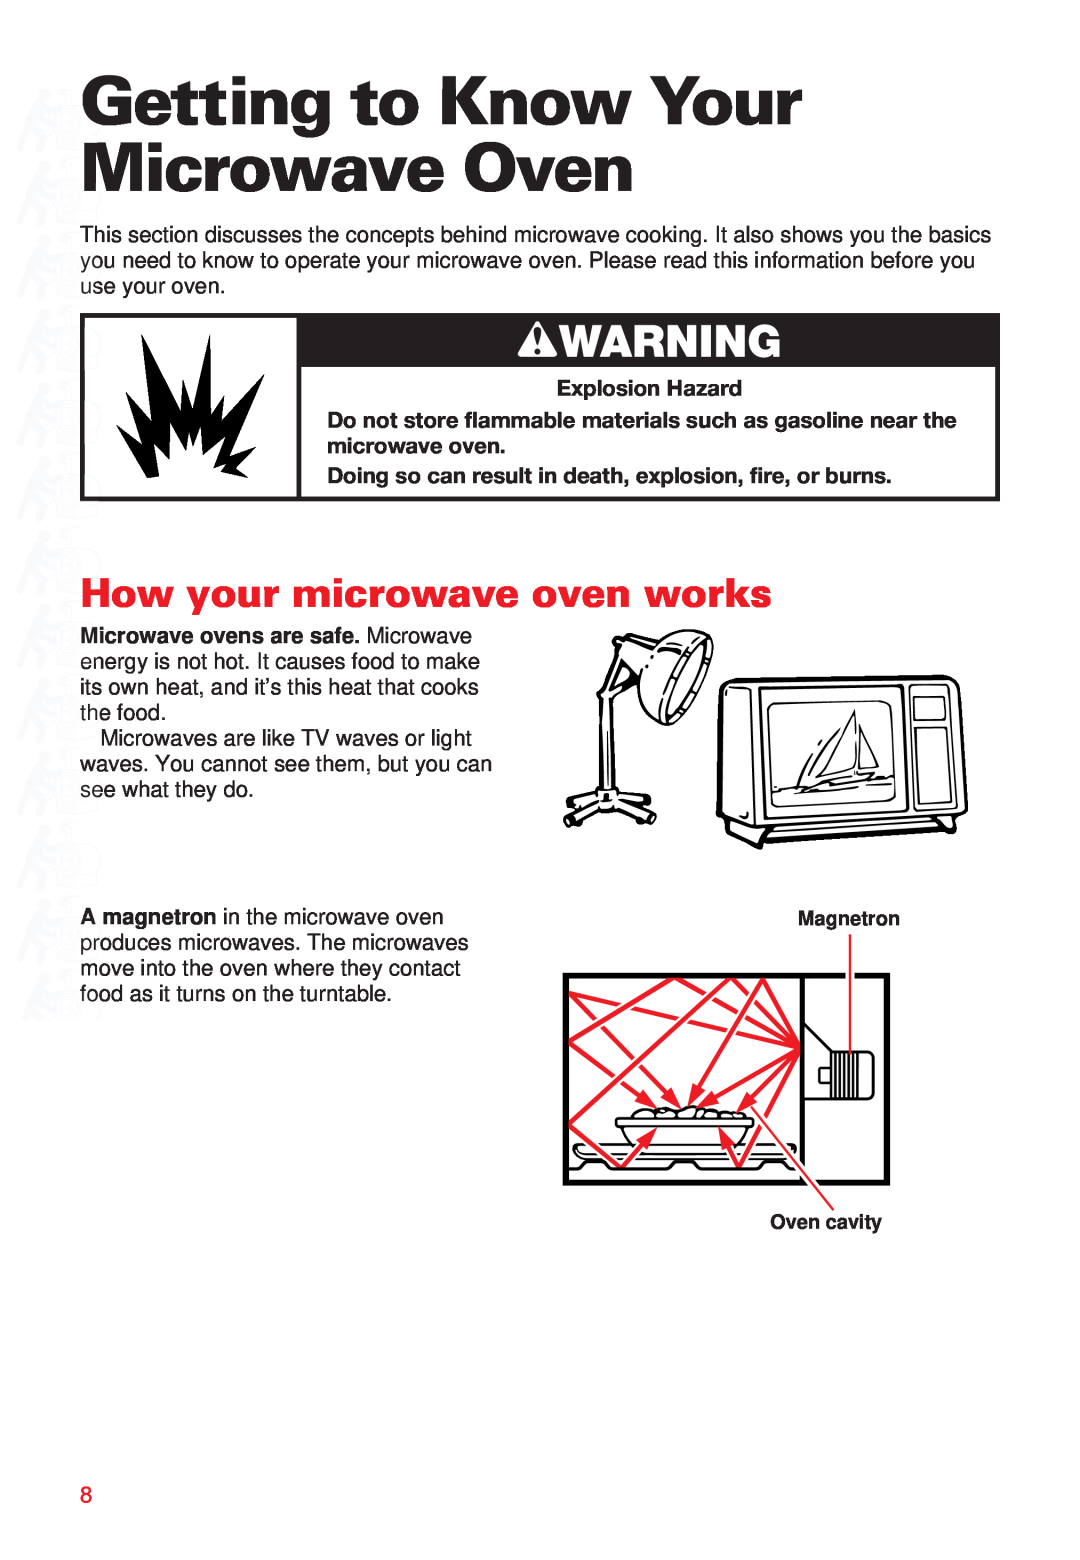 Whirlpool MT8068SE Getting to Know Your Microwave Oven, How your microwave oven works, Explosion Hazard, wWARNING 